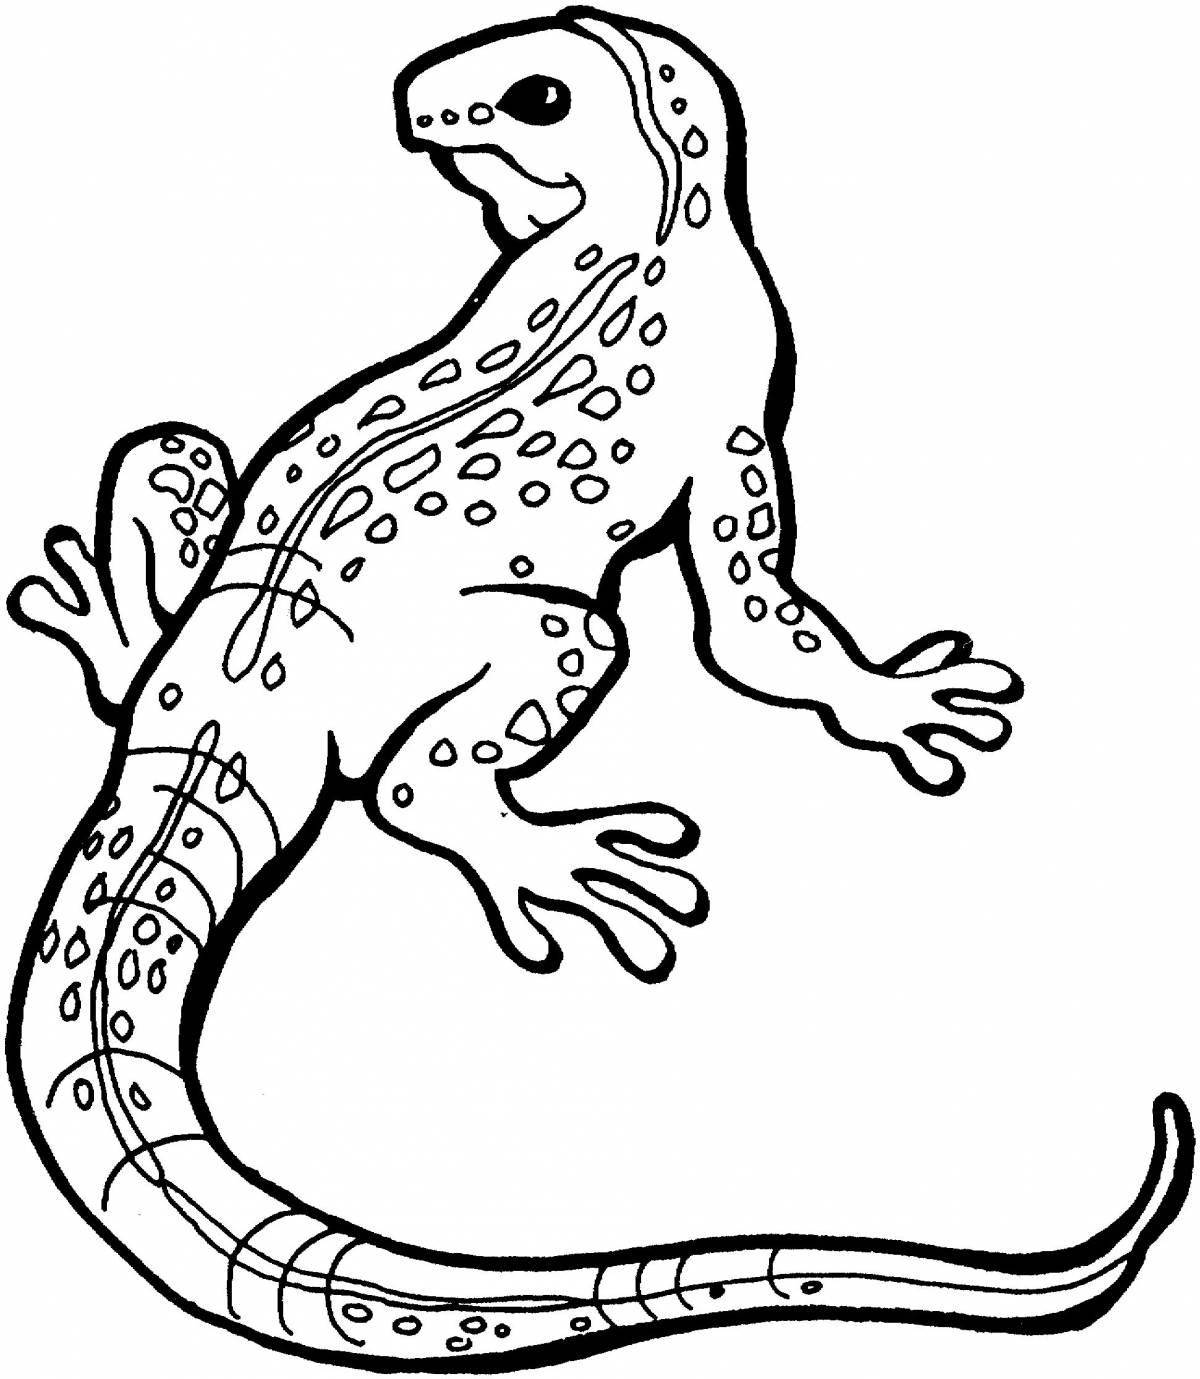 Colorful lizard coloring book for kids